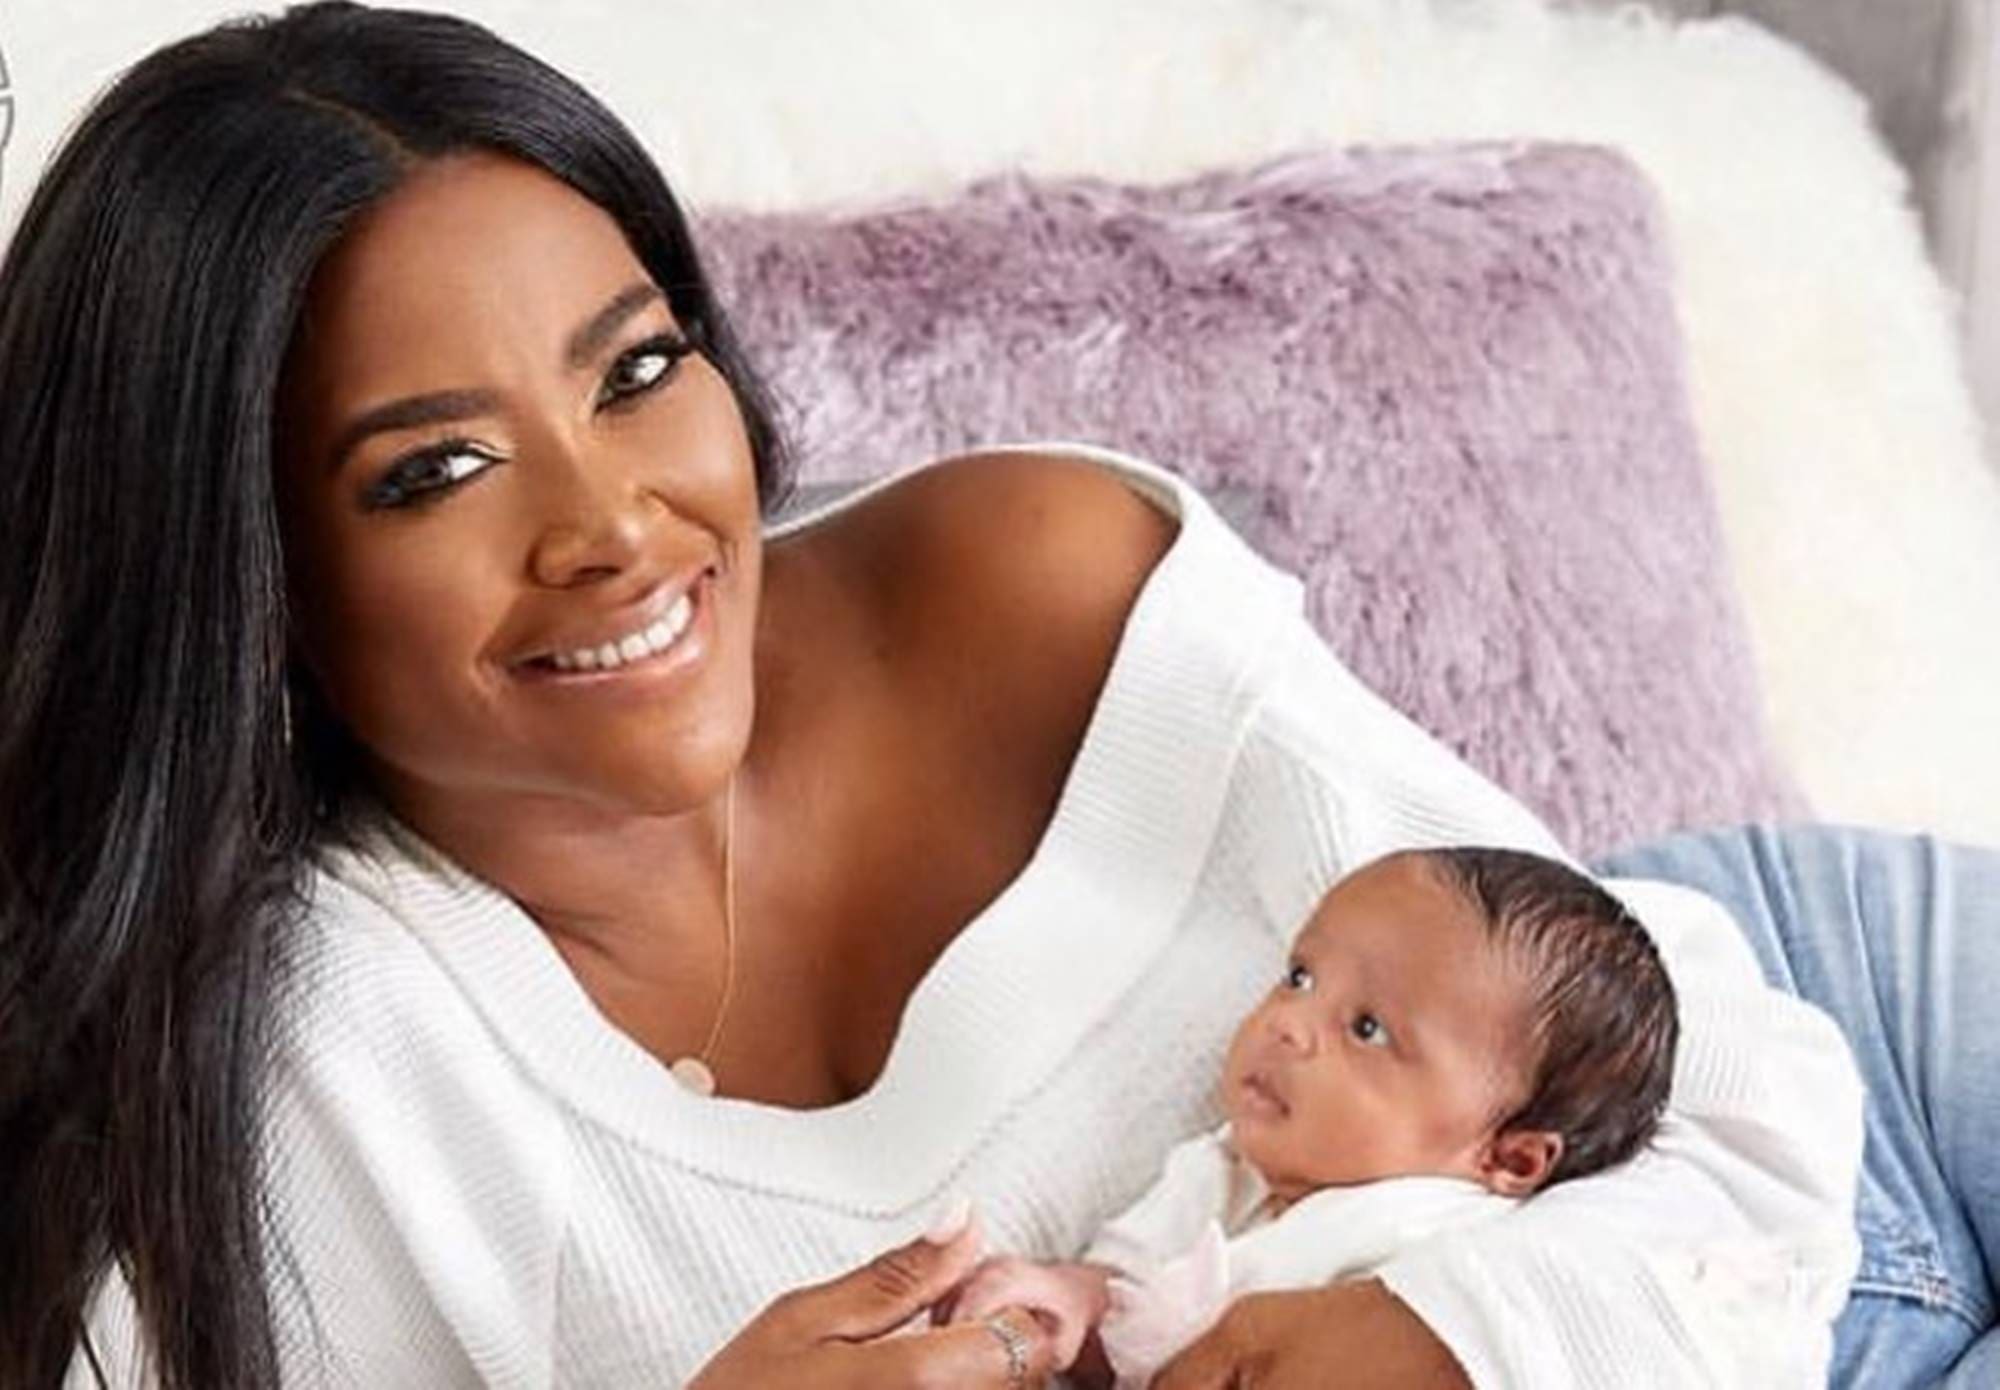 Kenya Moore Is Spending Some Quality Time With Baby Brooklyn At The Beach And Fans Are Happy To See The Mom Without Makeup - Here's Her Latest Photo